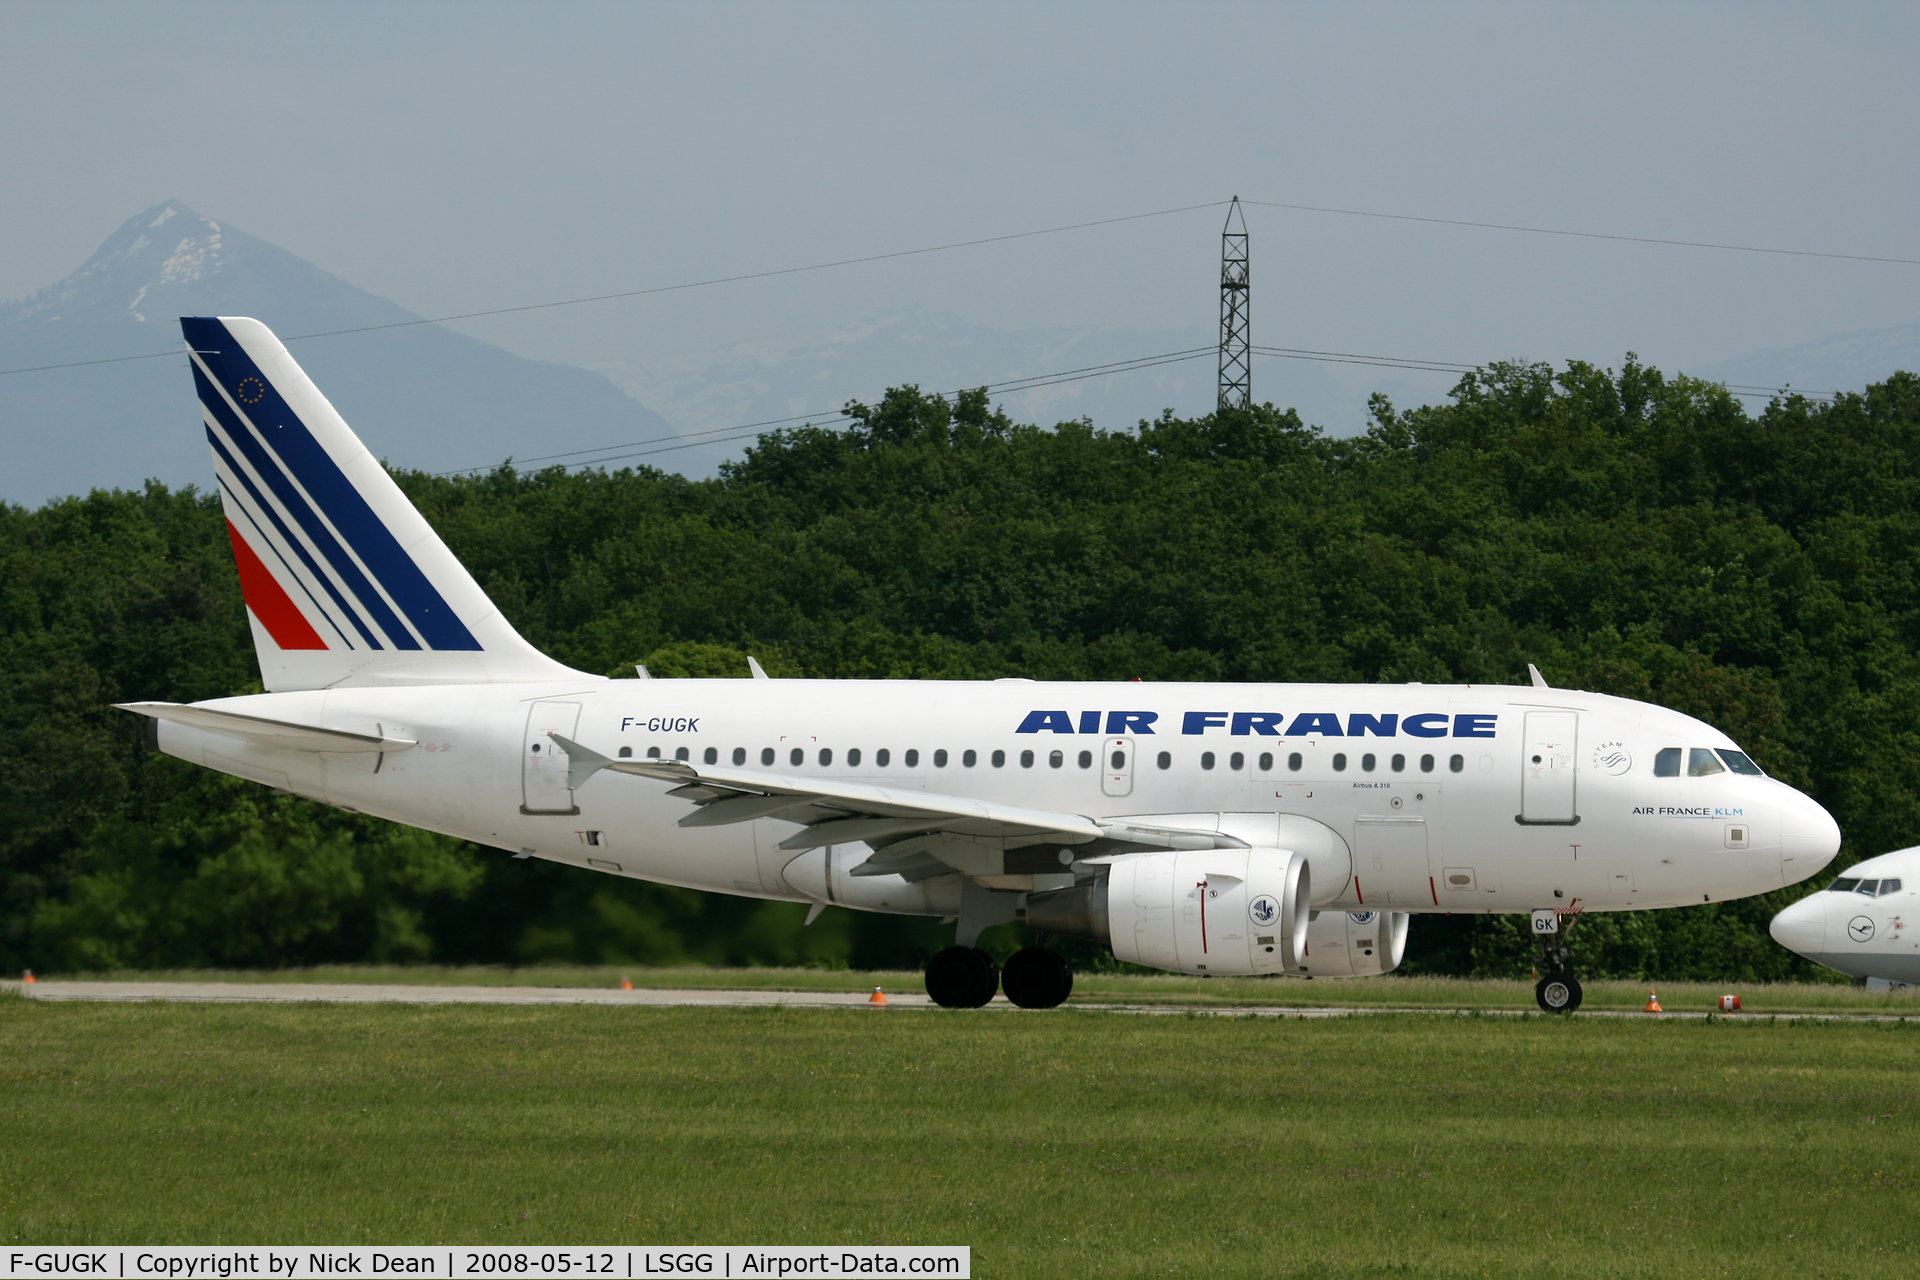 F-GUGK, 2005 Airbus A318-111 C/N 2601, LSGG